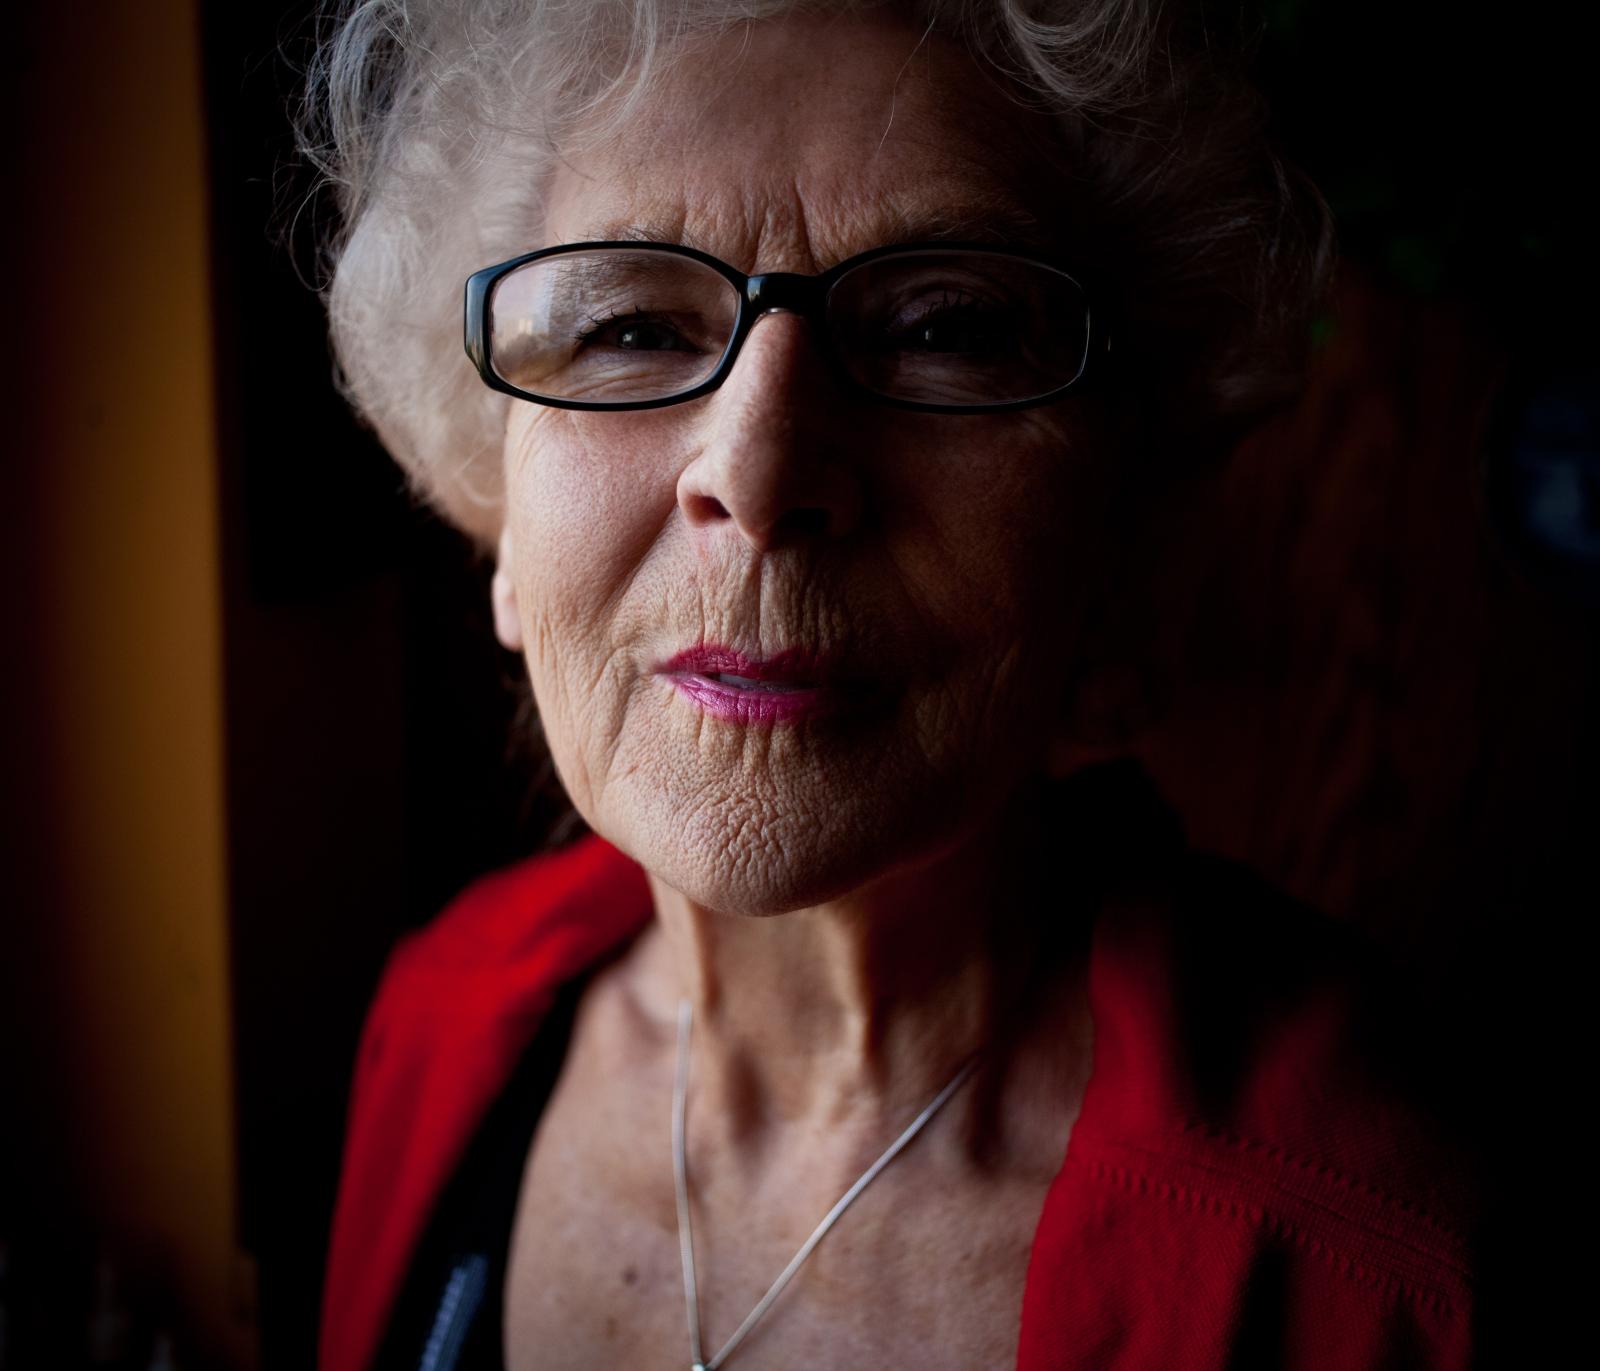 Image from Portraits In Colour - WARSAW, POLAND, NOVEMBER 2011: Wika Szmyt, 74 year old...